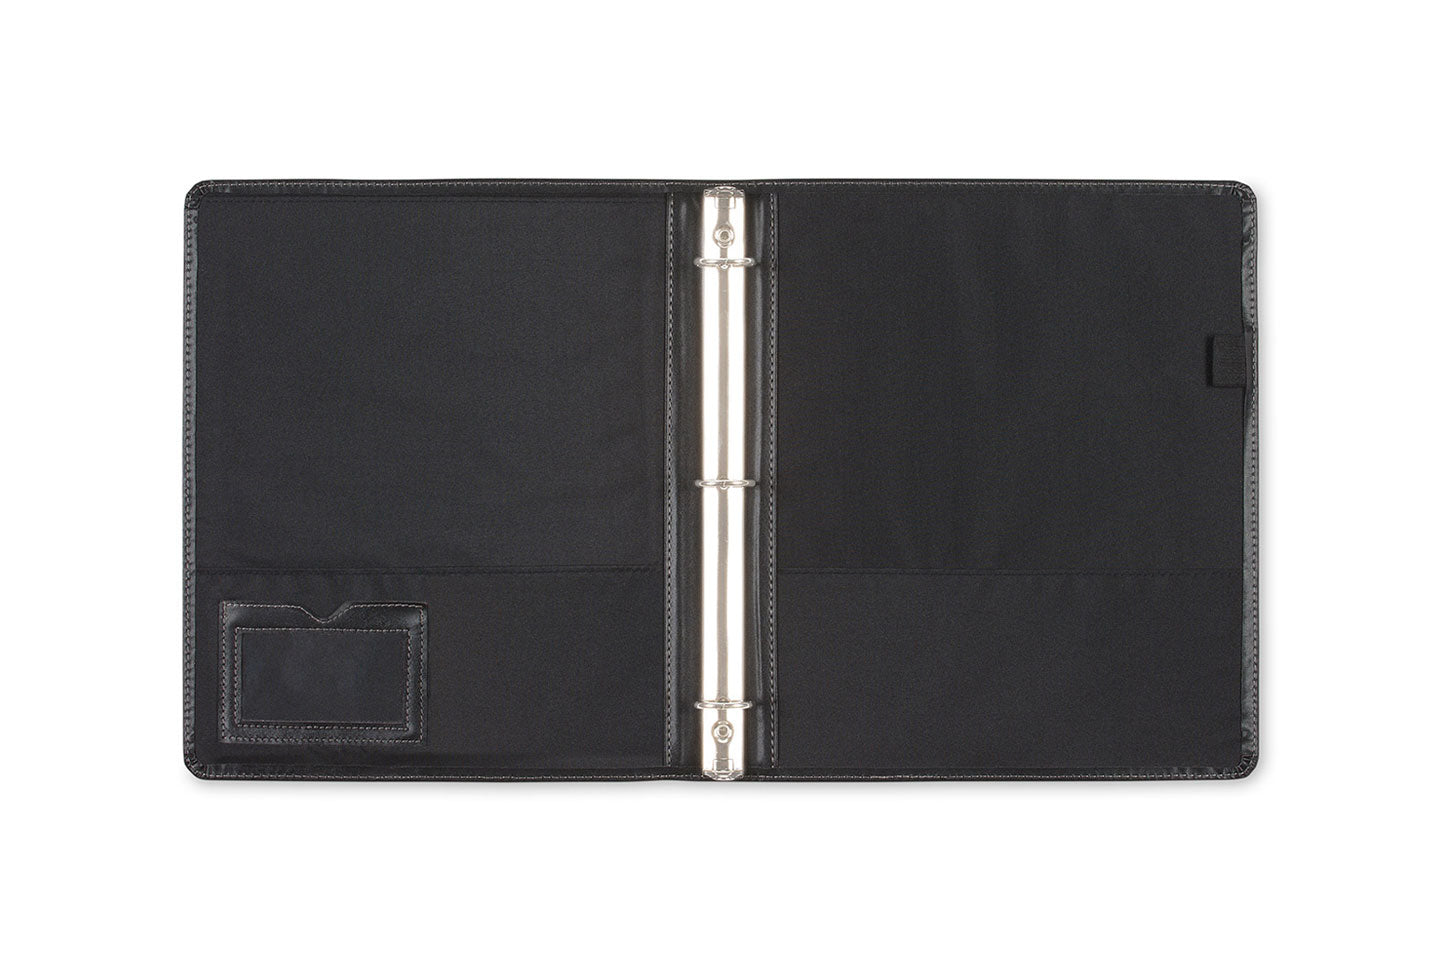 Black Onyx Deluxe 3-Ring Presentation Binder with Interior Pockets